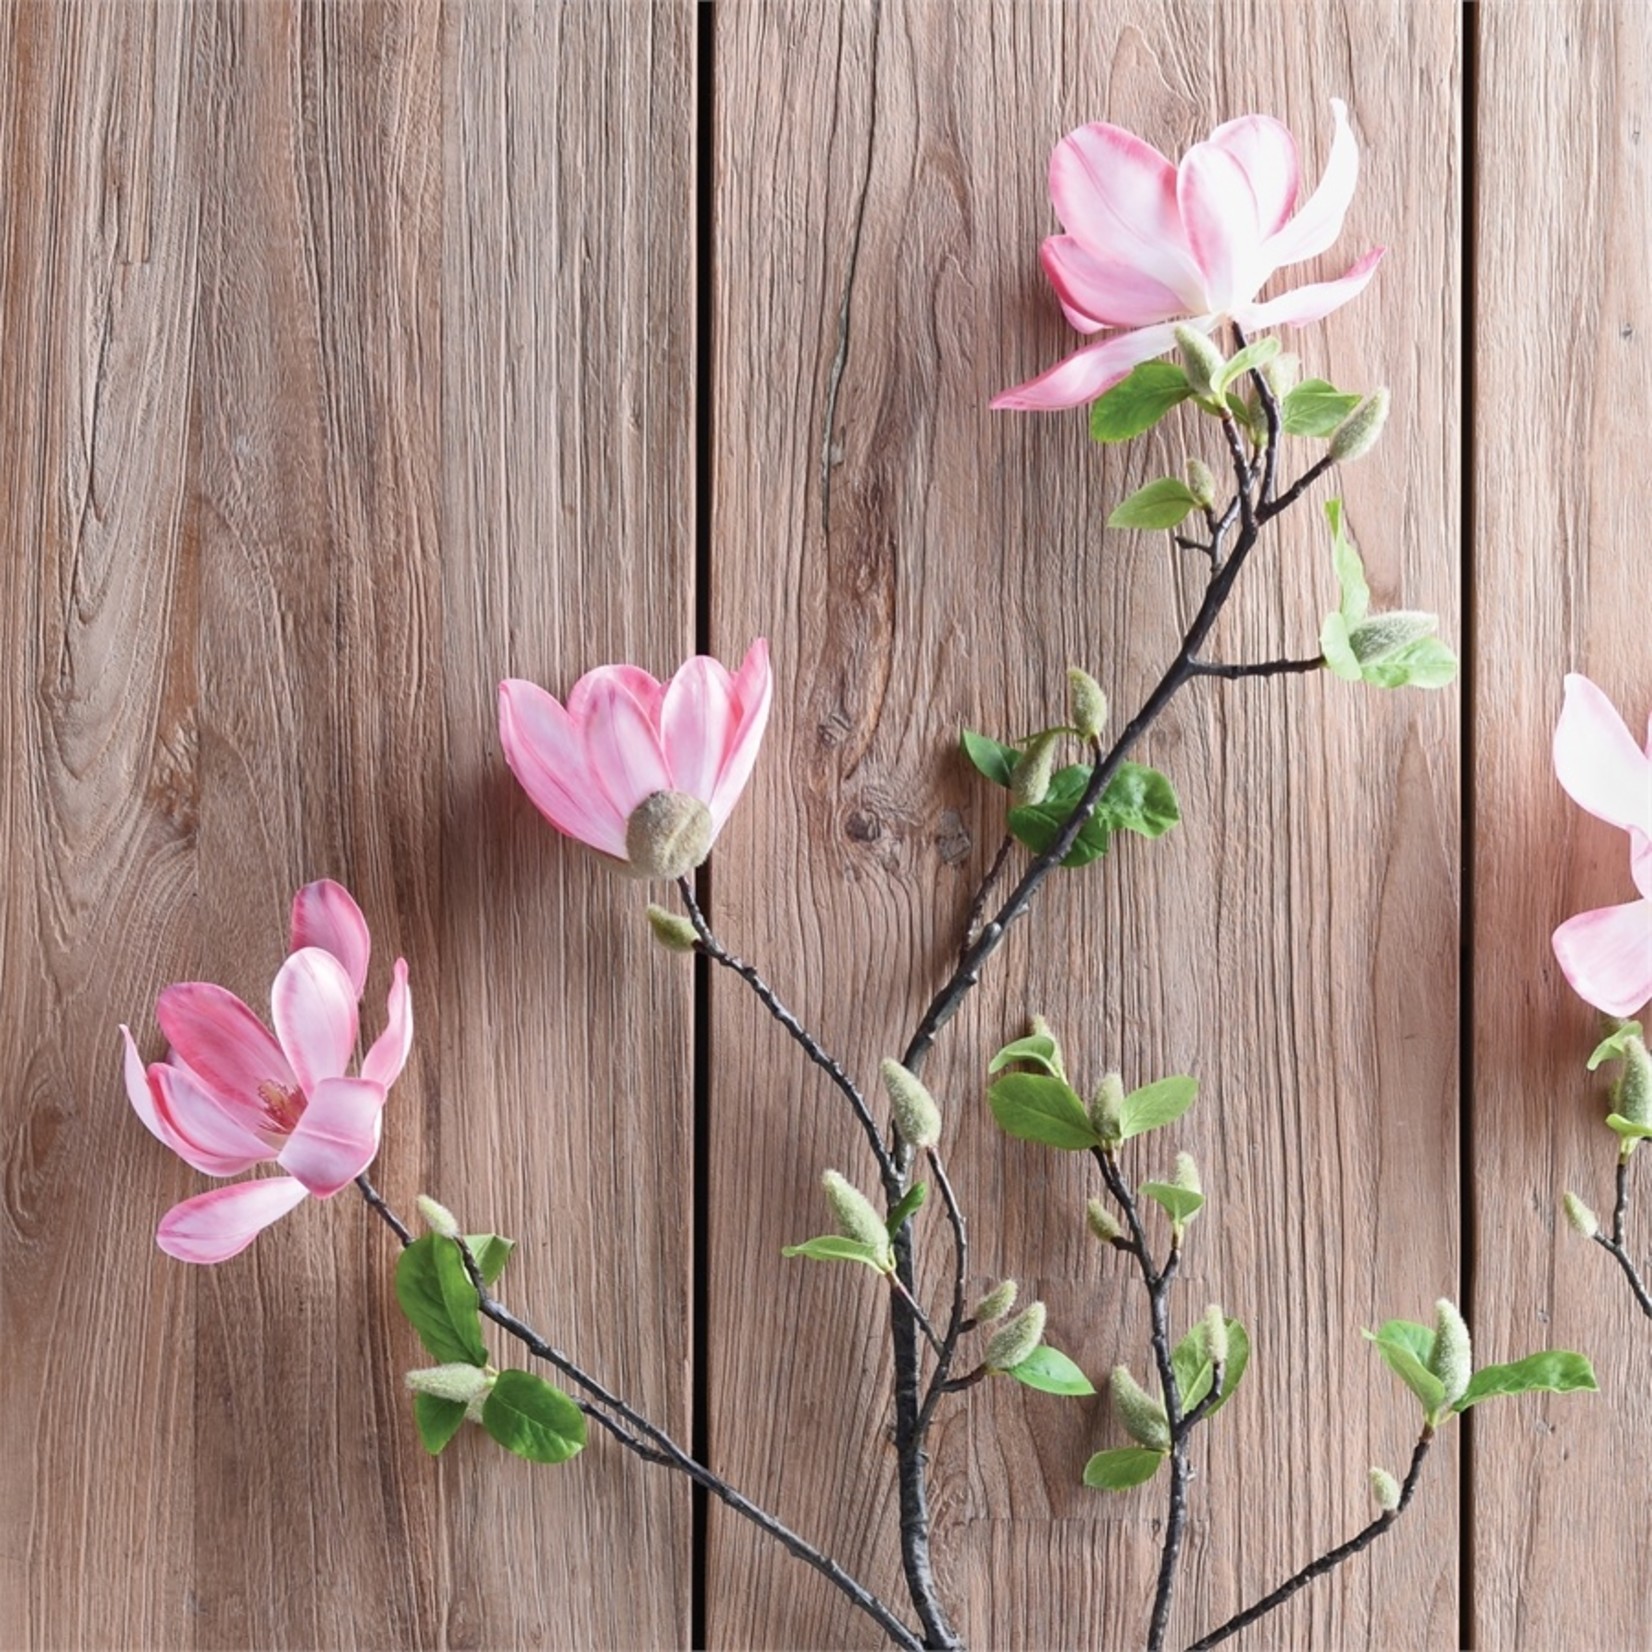 Napa Home and Garden Japanese Magnolia Branch in Pink - 54"